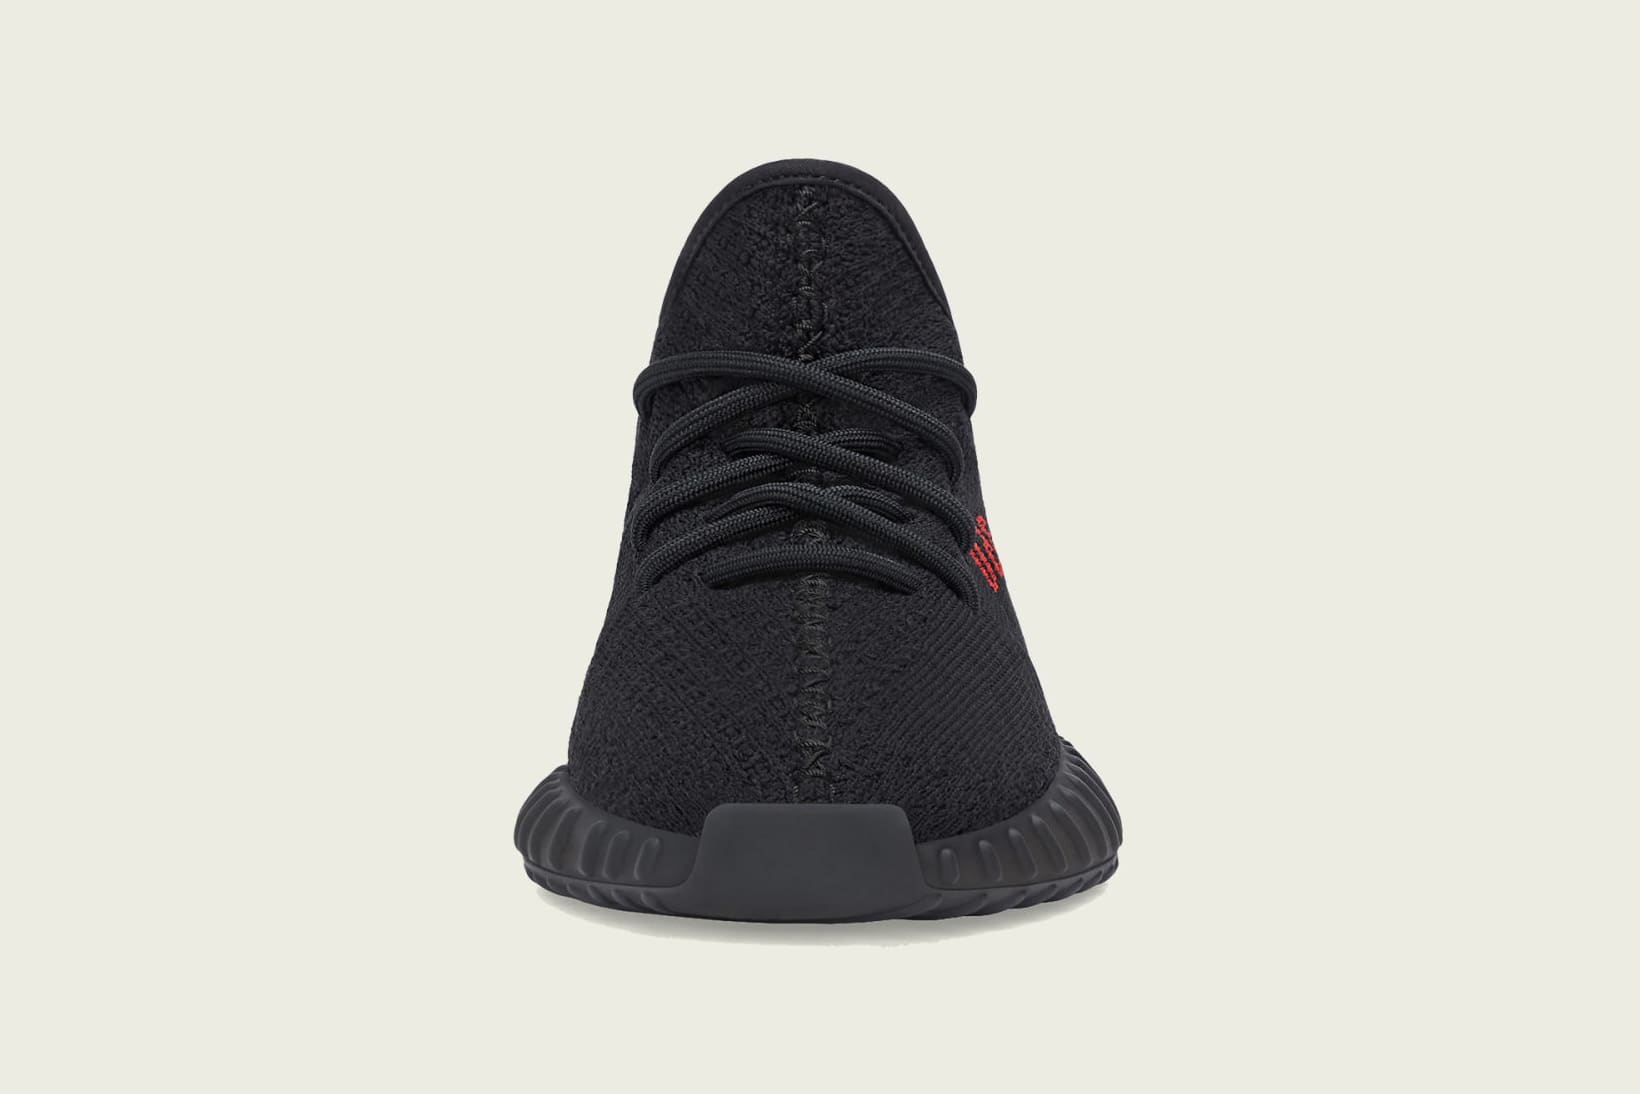 when do the black yeezys come out